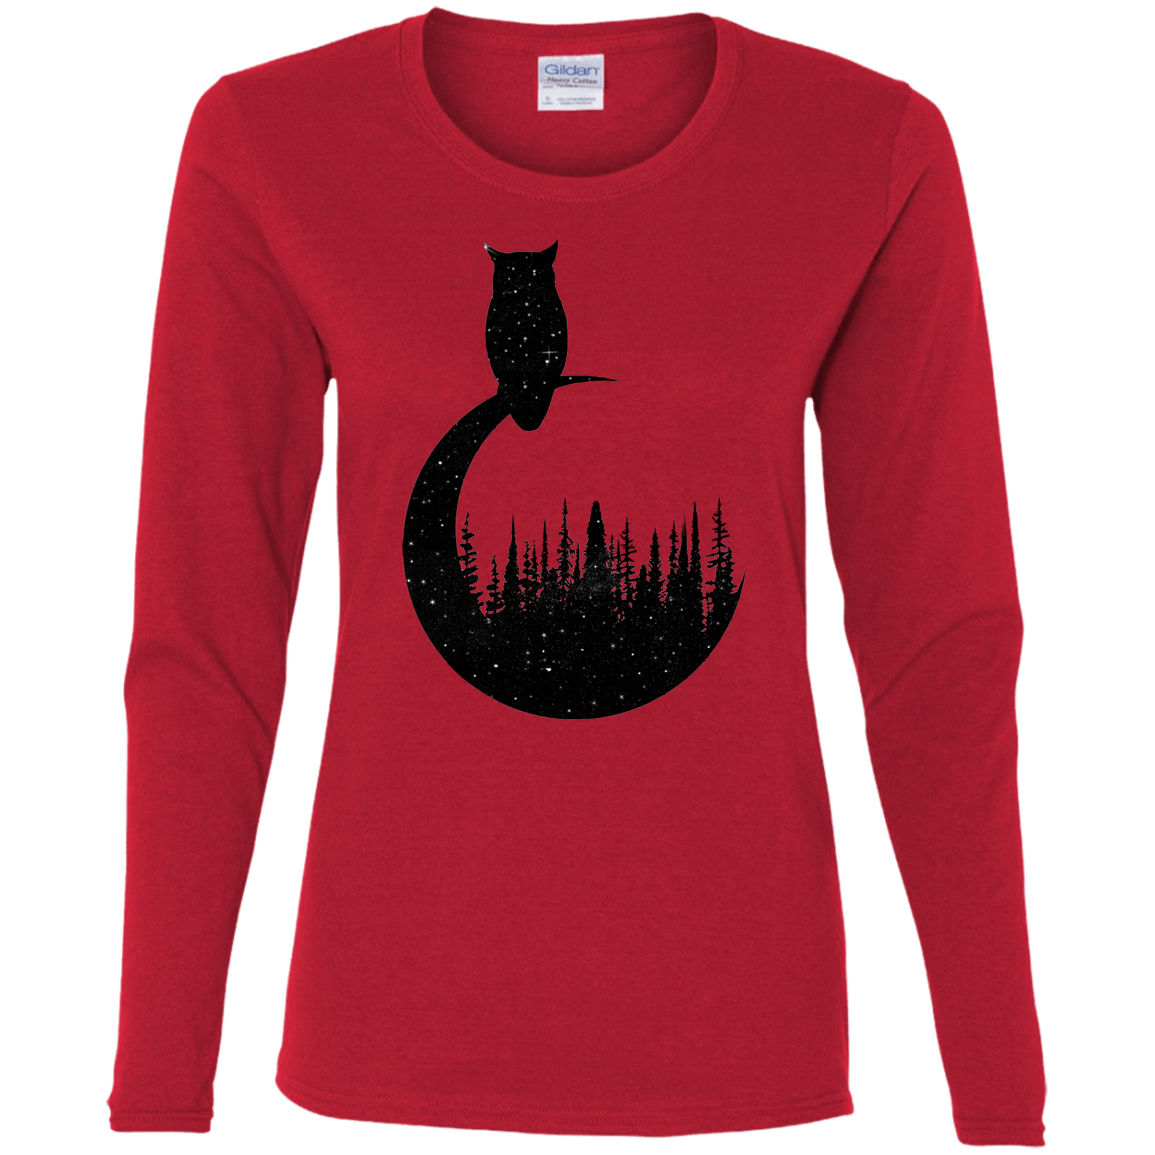 T-Shirts Red / S Perched Owl Women's Long Sleeve T-Shirt